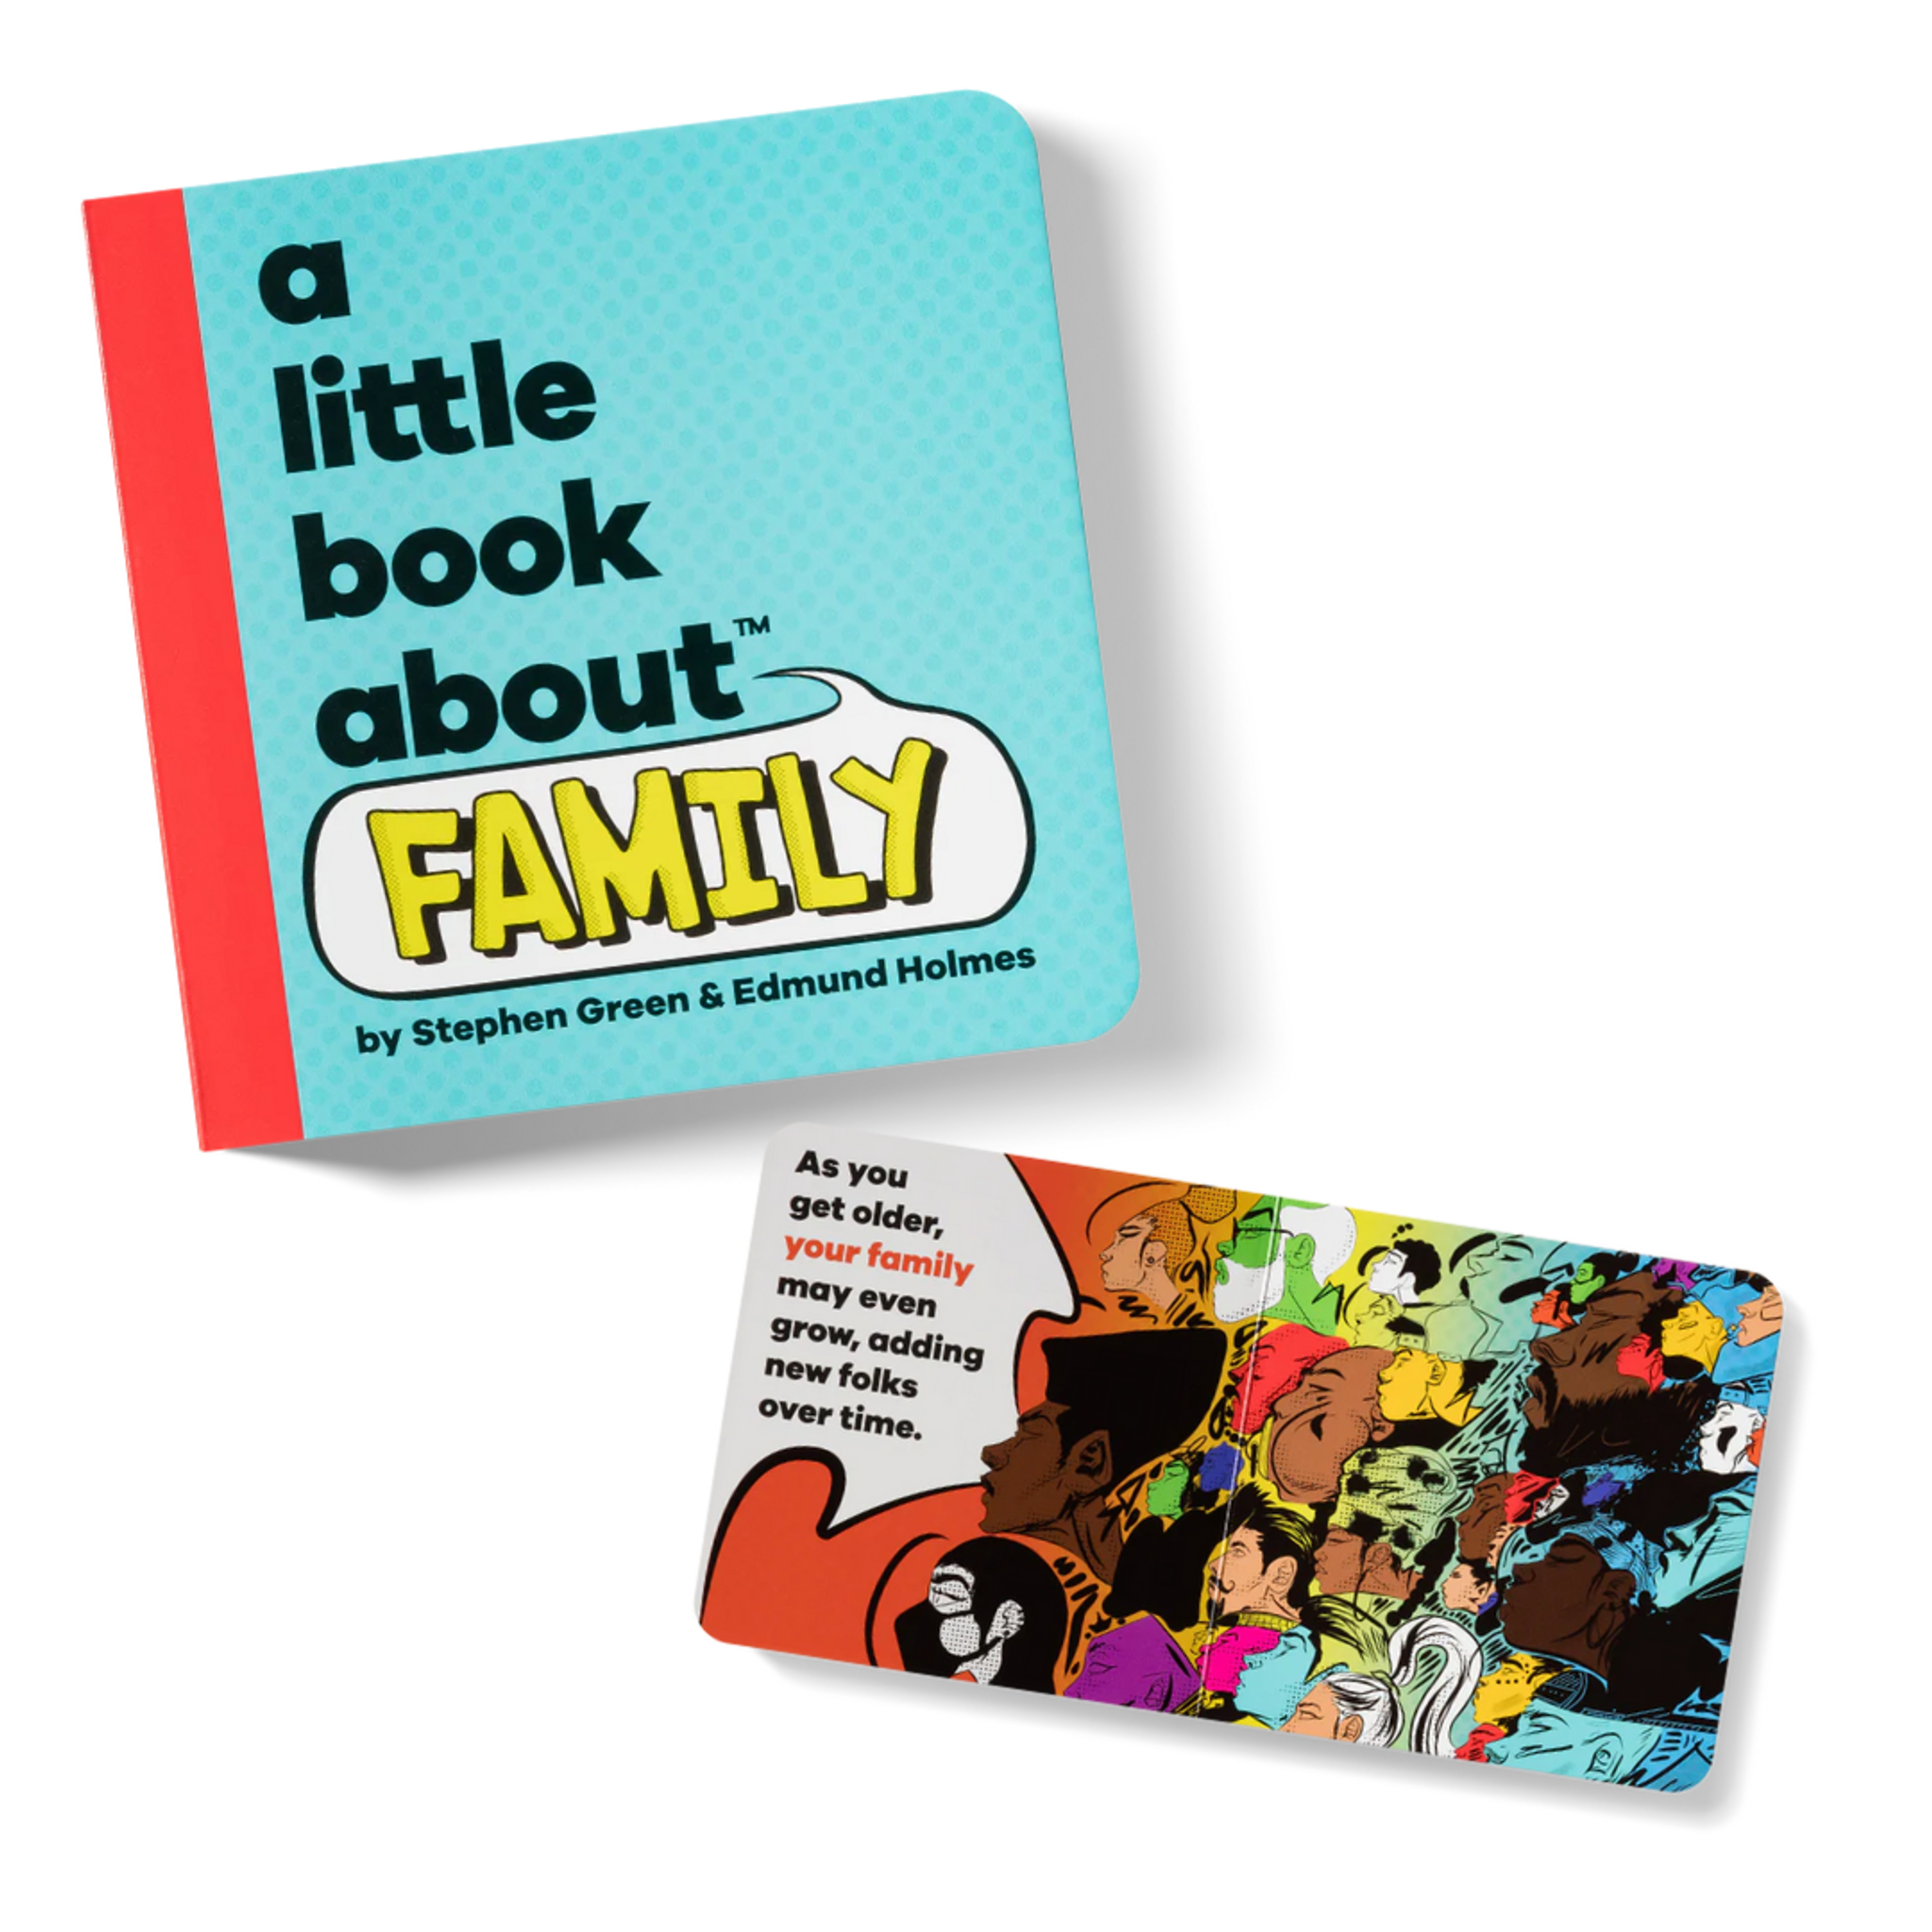 A Little Board Book about Family